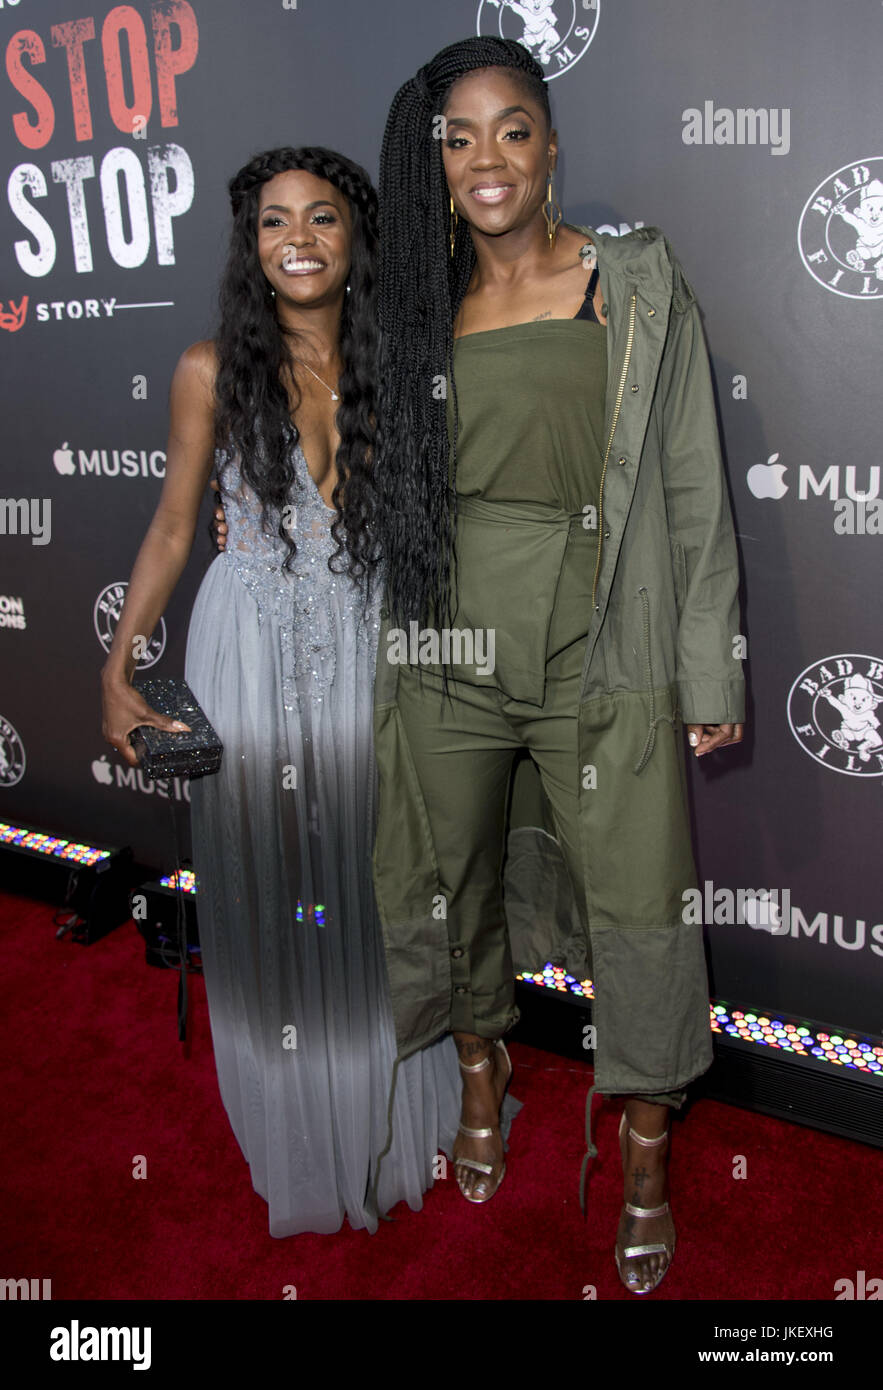 Los Angeles premiere of 'Can't Stop, Won't Stop: The Bad Boy Story' -  Arrivals Featuring: Kima Raynor Dyson, Pamela Long Where: Los Angeles,  California, United States When: 21 Jun 2017 Credit: Eugene